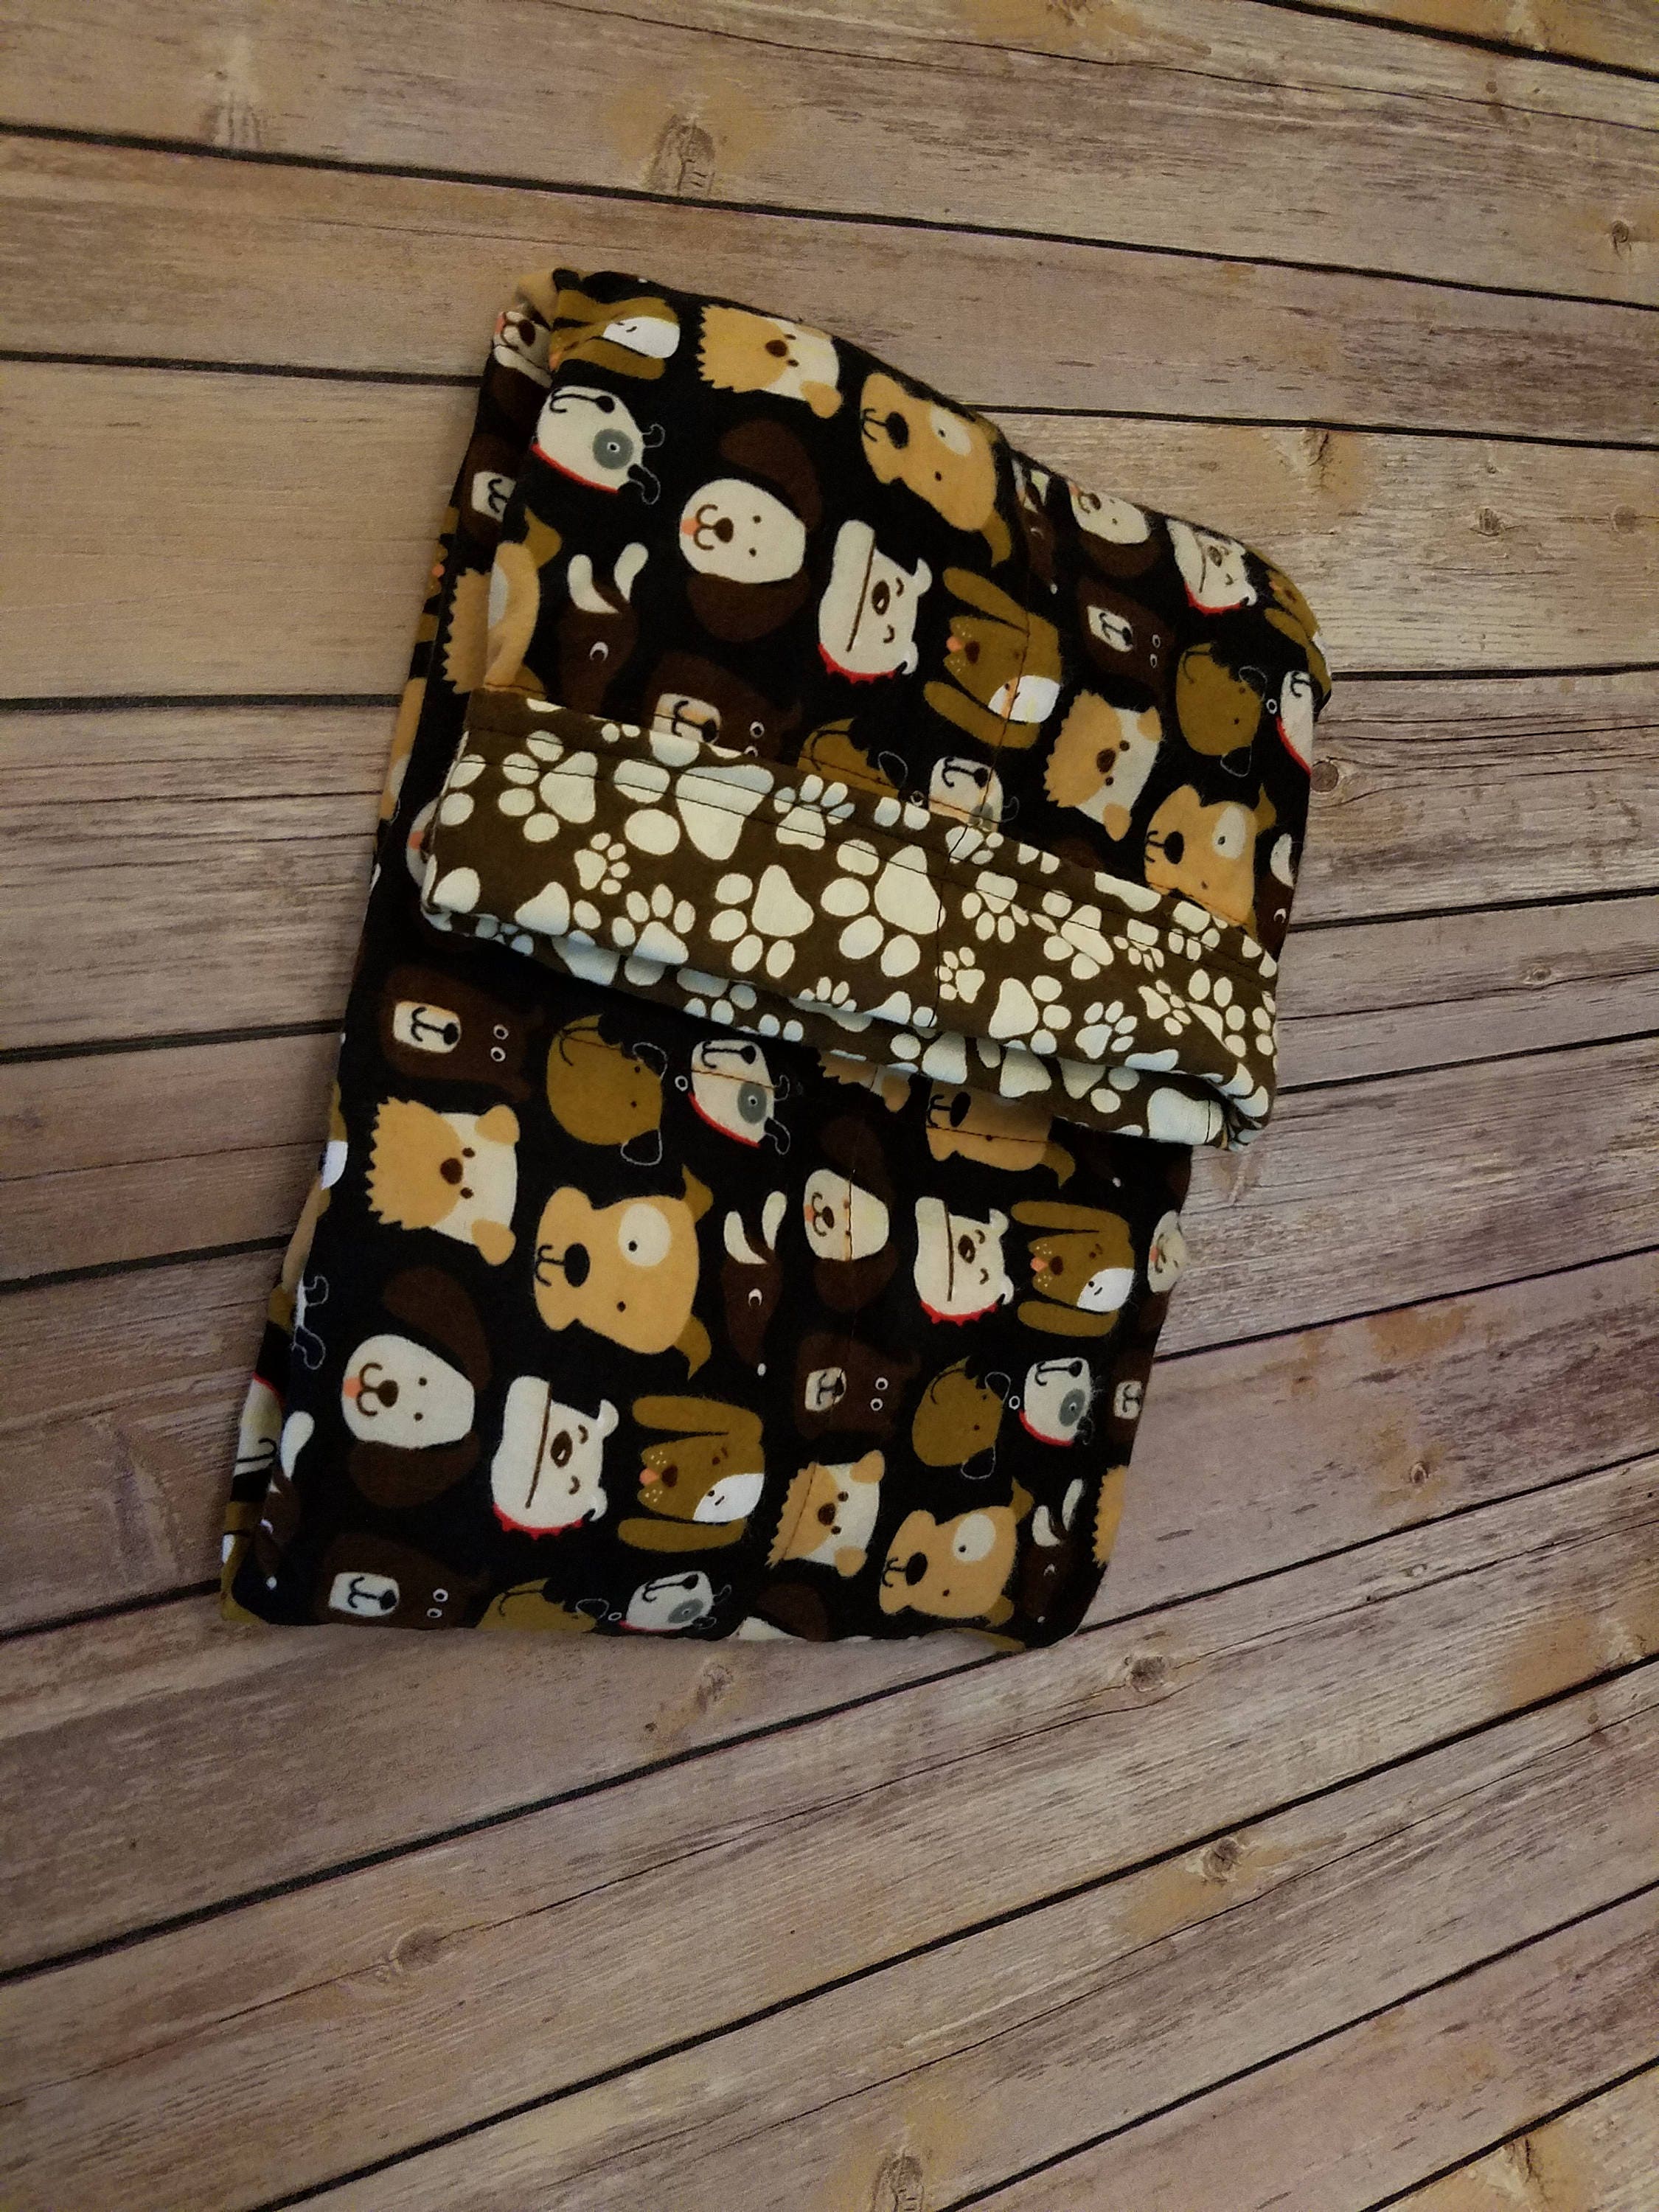 Dog, Puppy, 5 Pound, WEIGHTED BLANKET, Ready To Ship, 5 pounds, 28x32